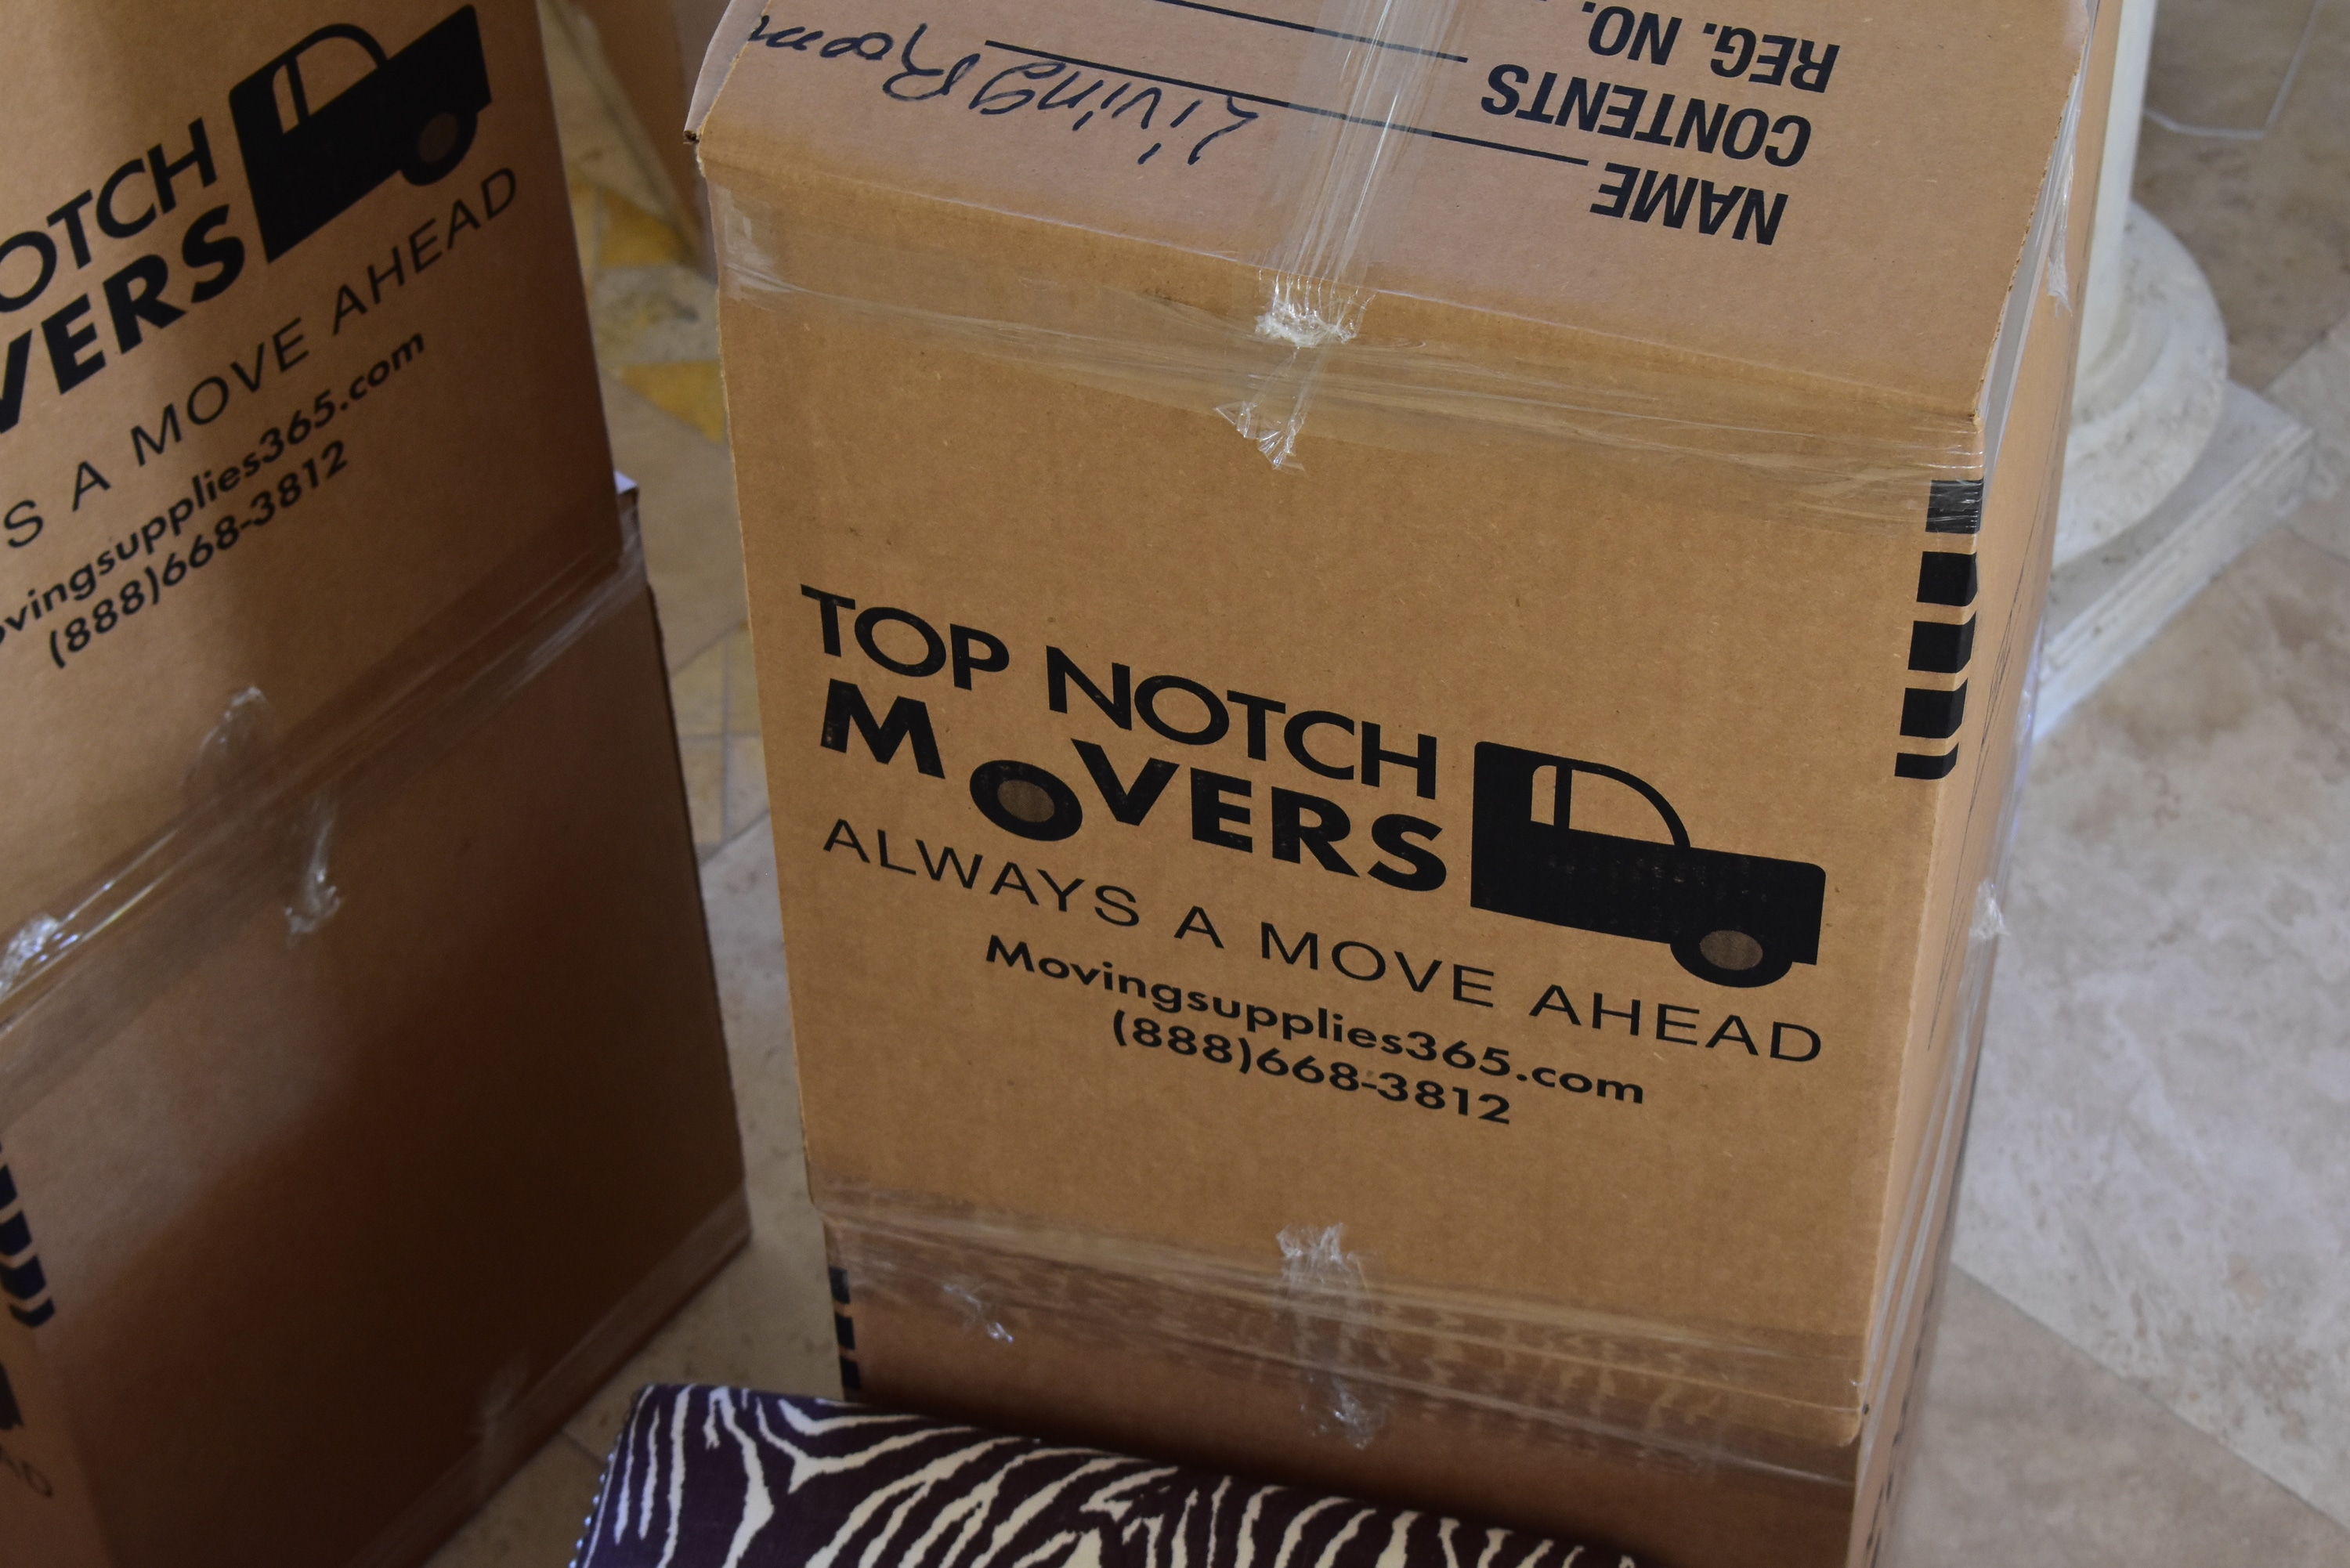 Moving companies moving tips